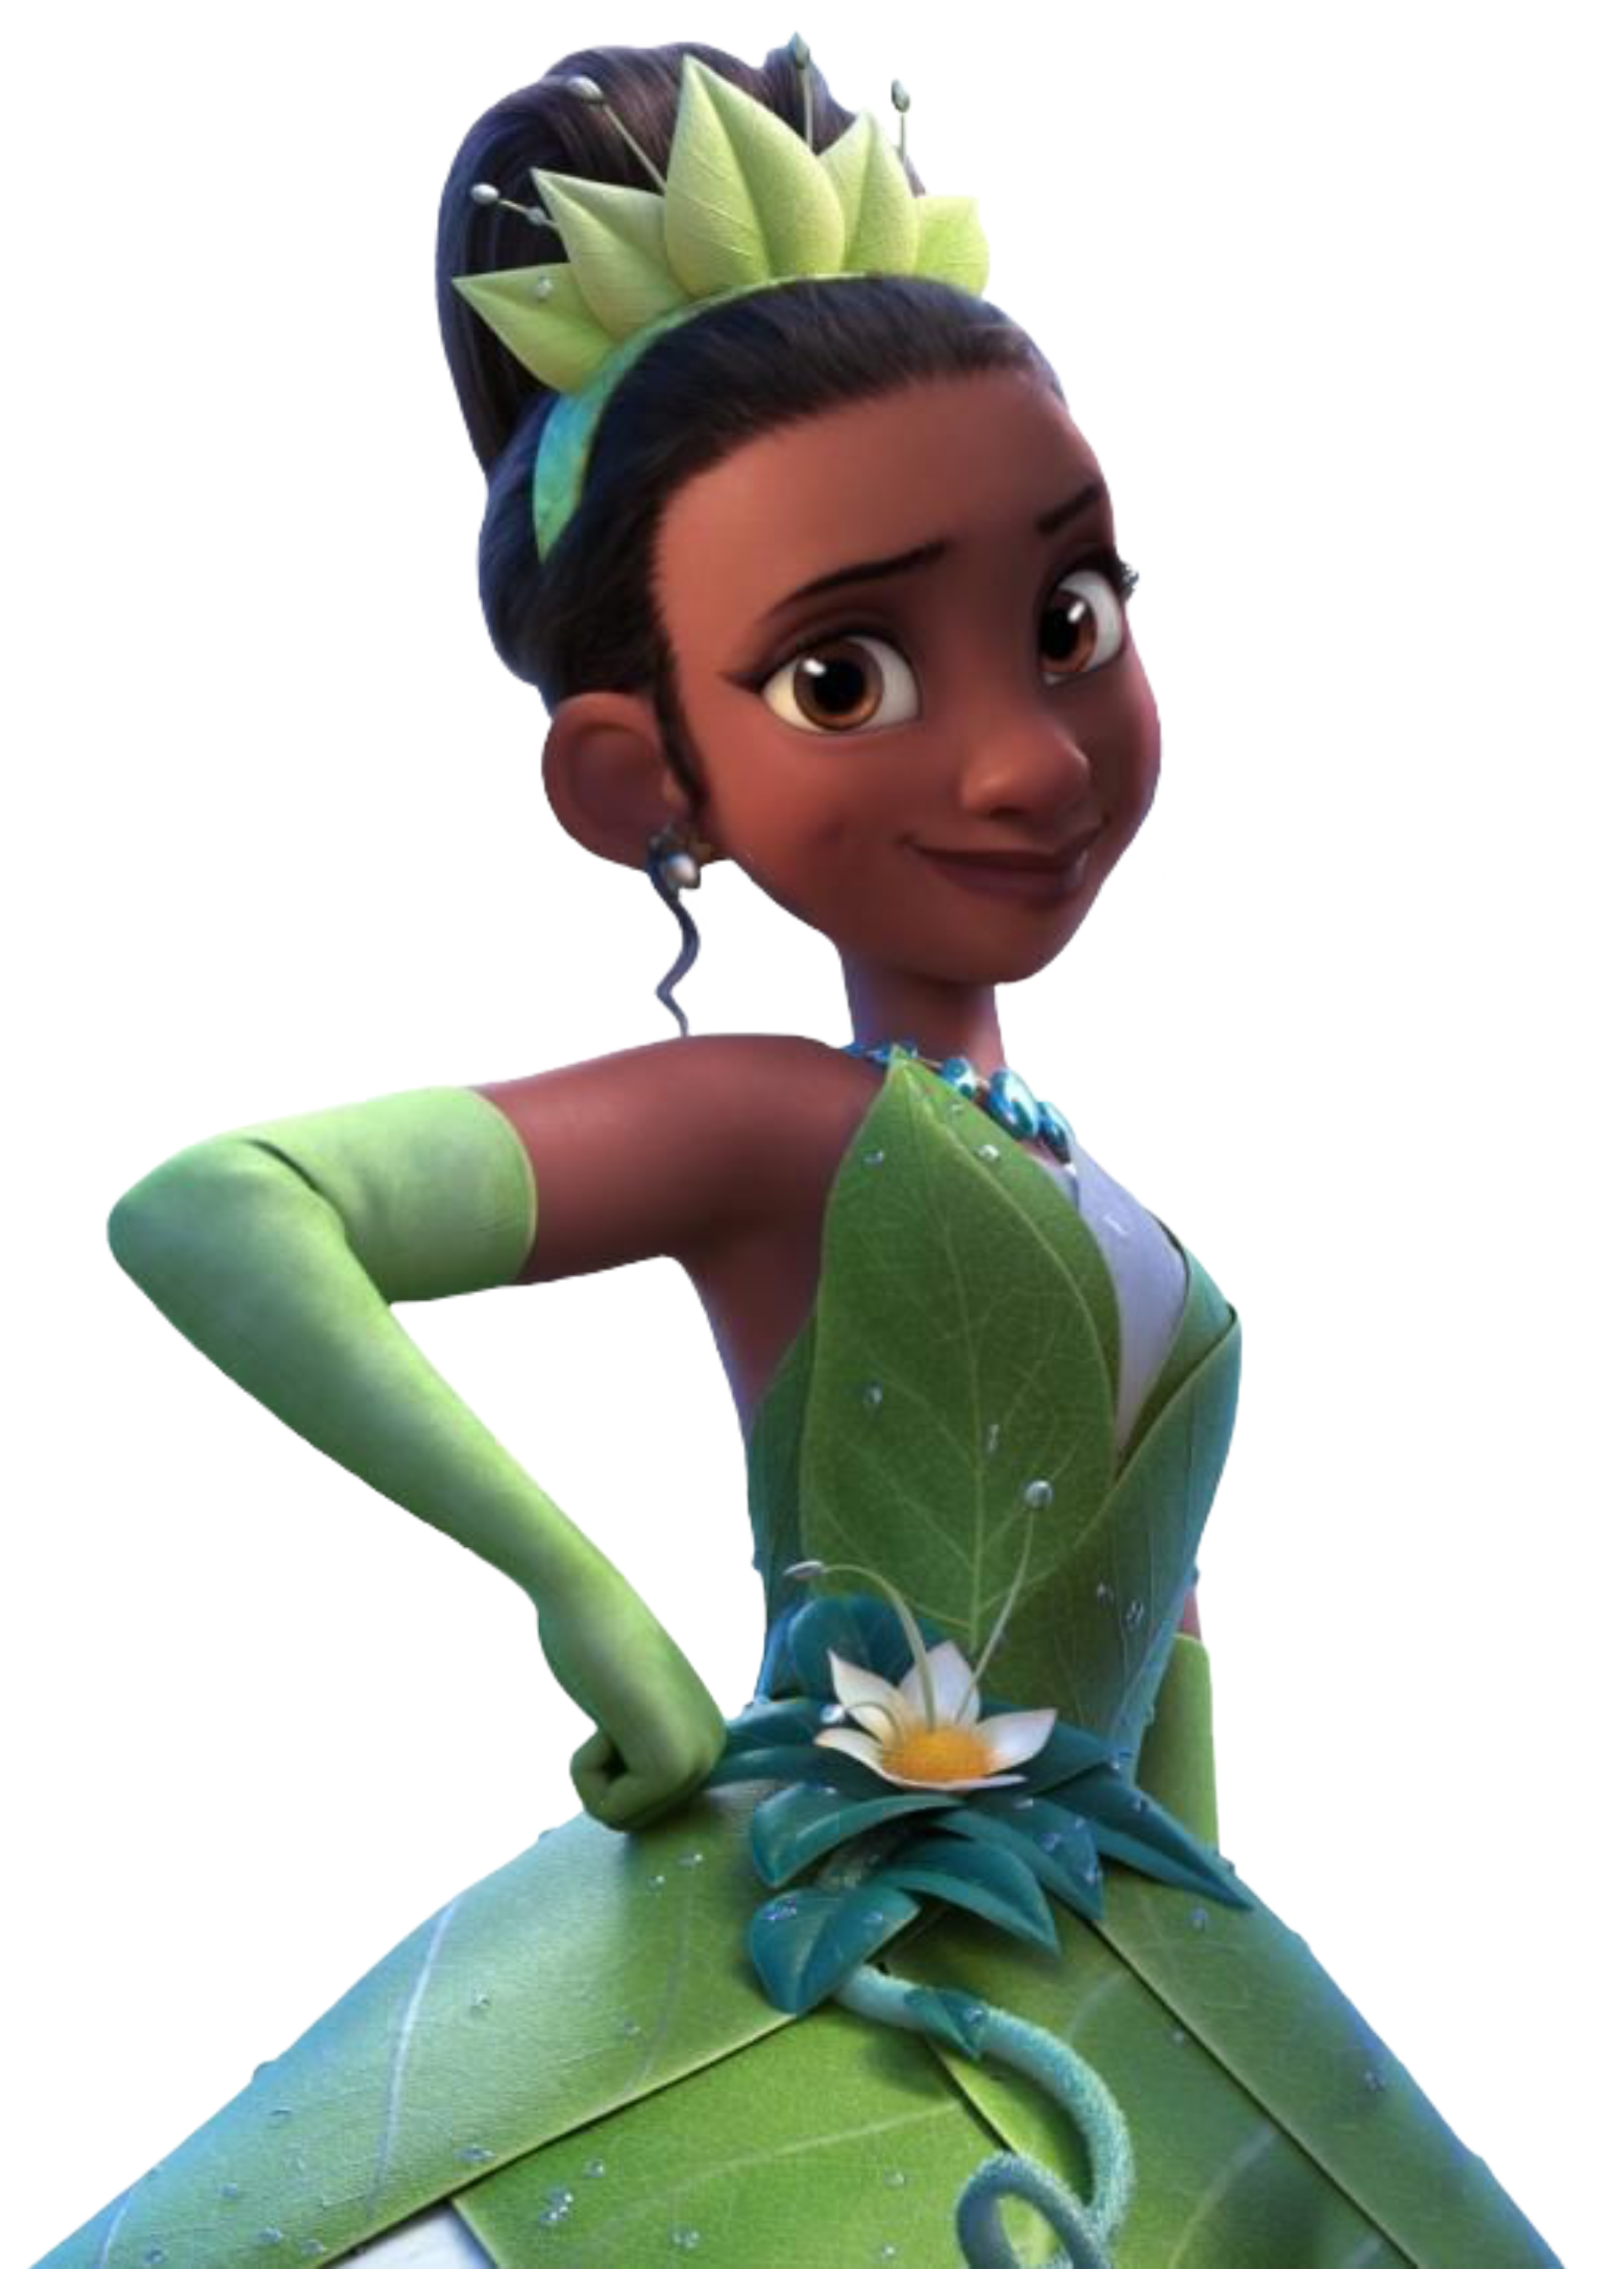 https://static.wikia.nocookie.net/fabulous-character-kingdoms/images/9/96/Queen_Tiana_of_Maldonia_Quad_HD.png/revision/latest?cb=20211018223110